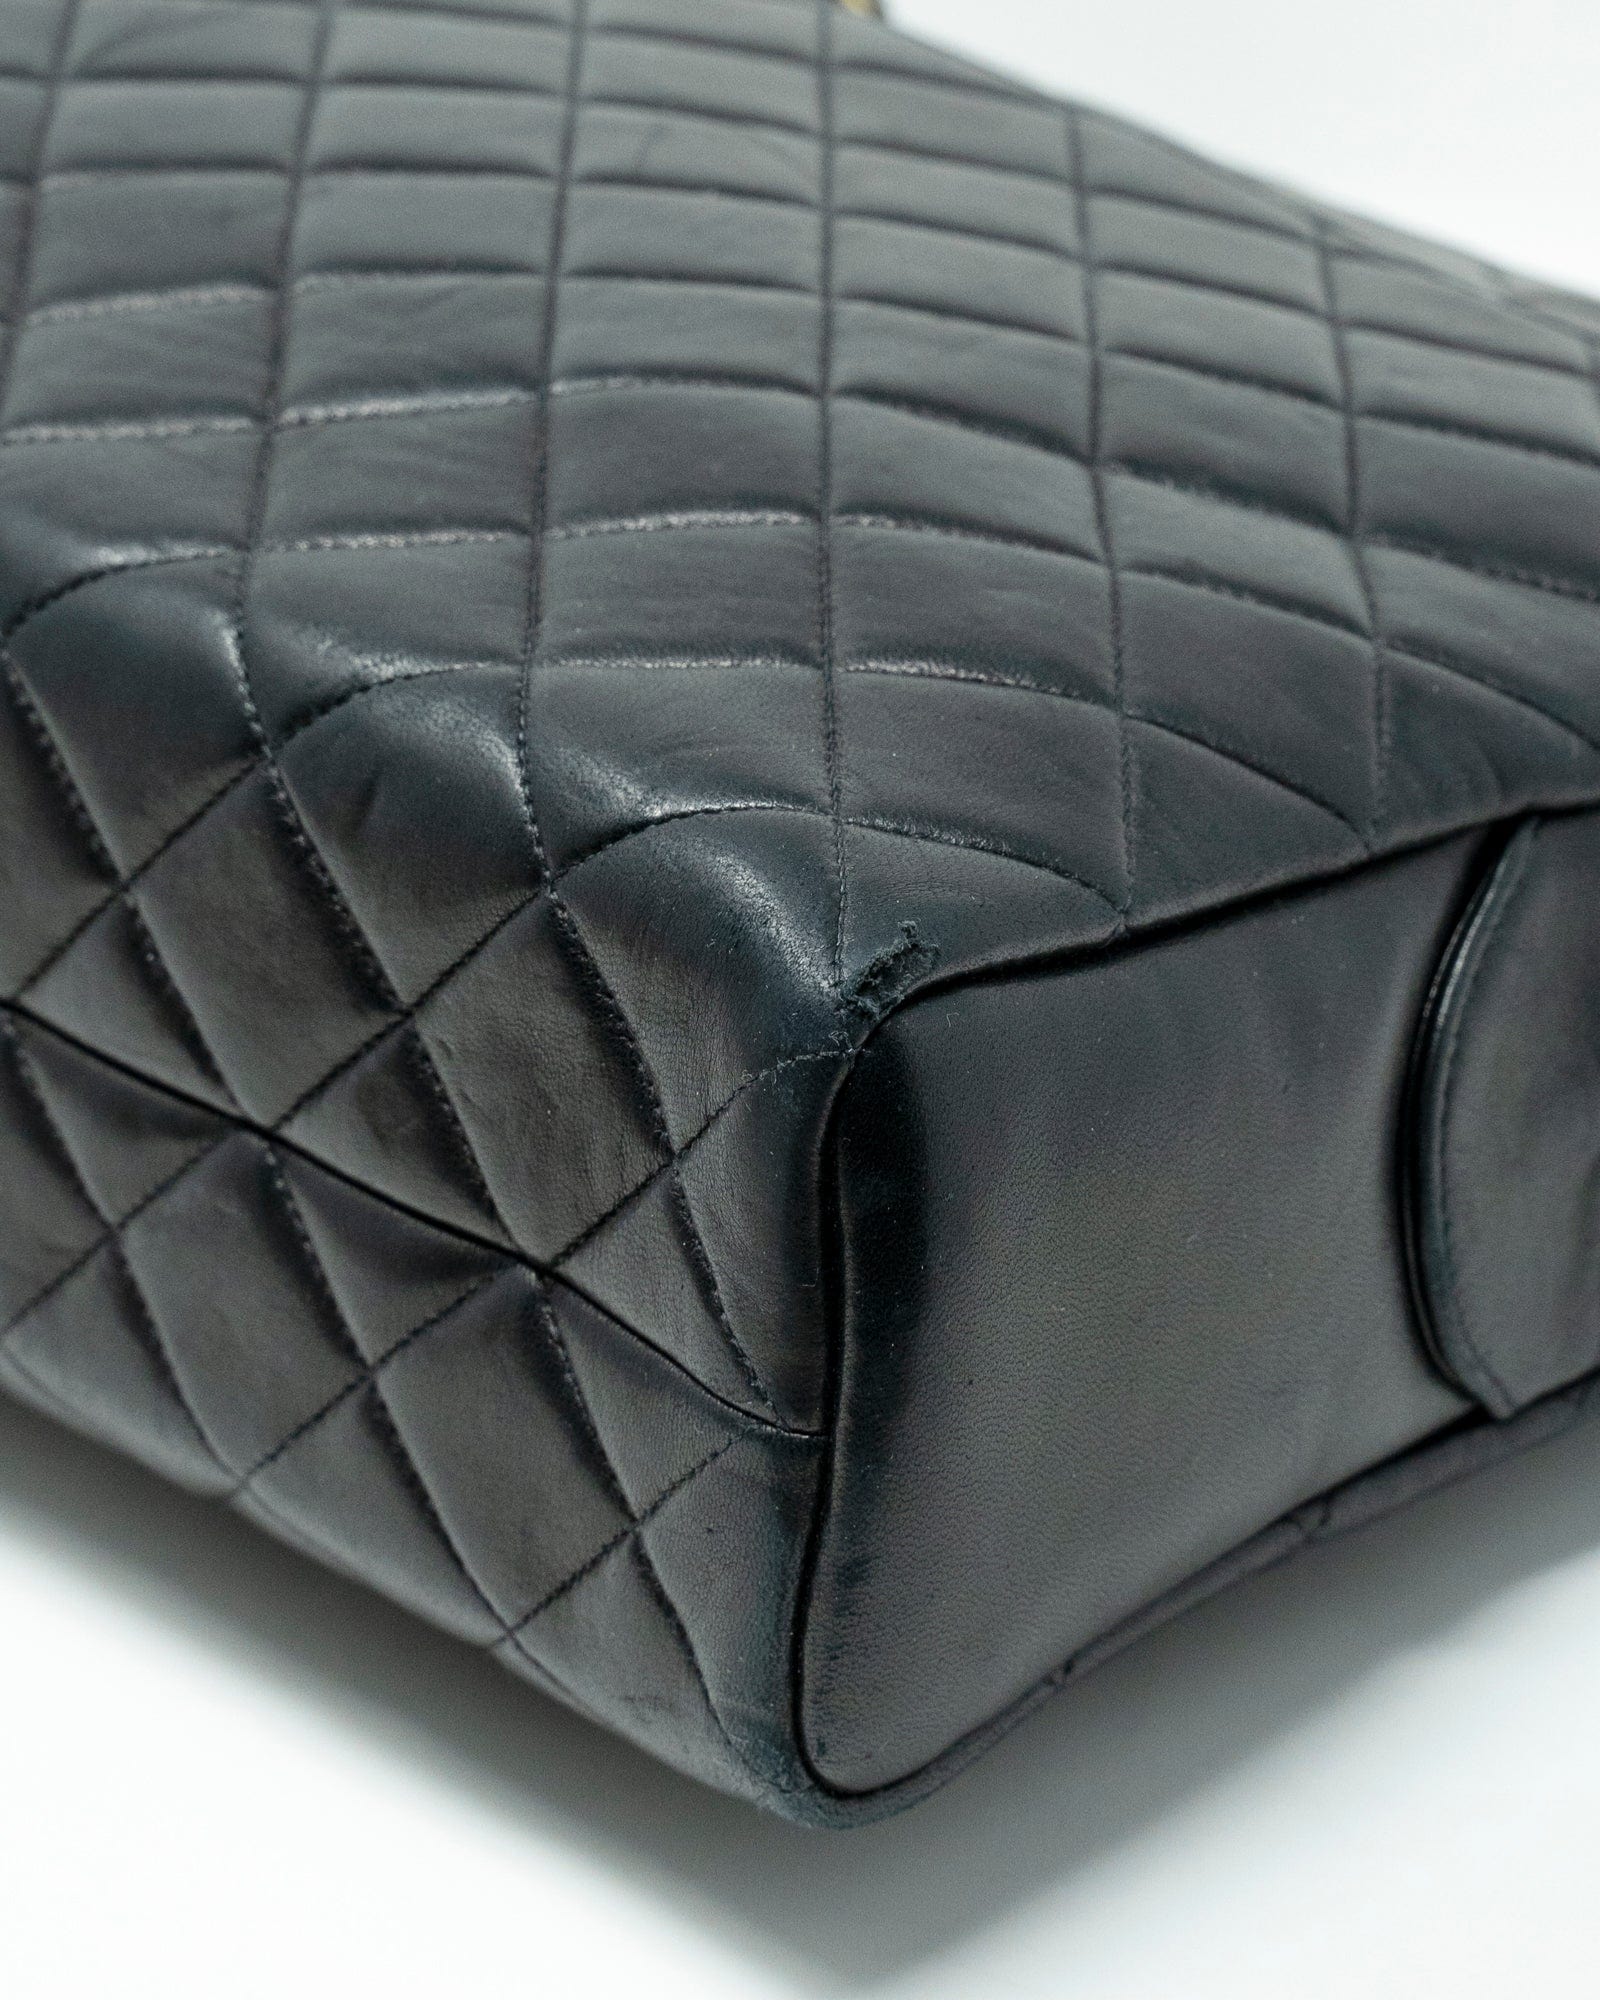 Chanel Chanel black lambskin quilted bag  - AGL1962